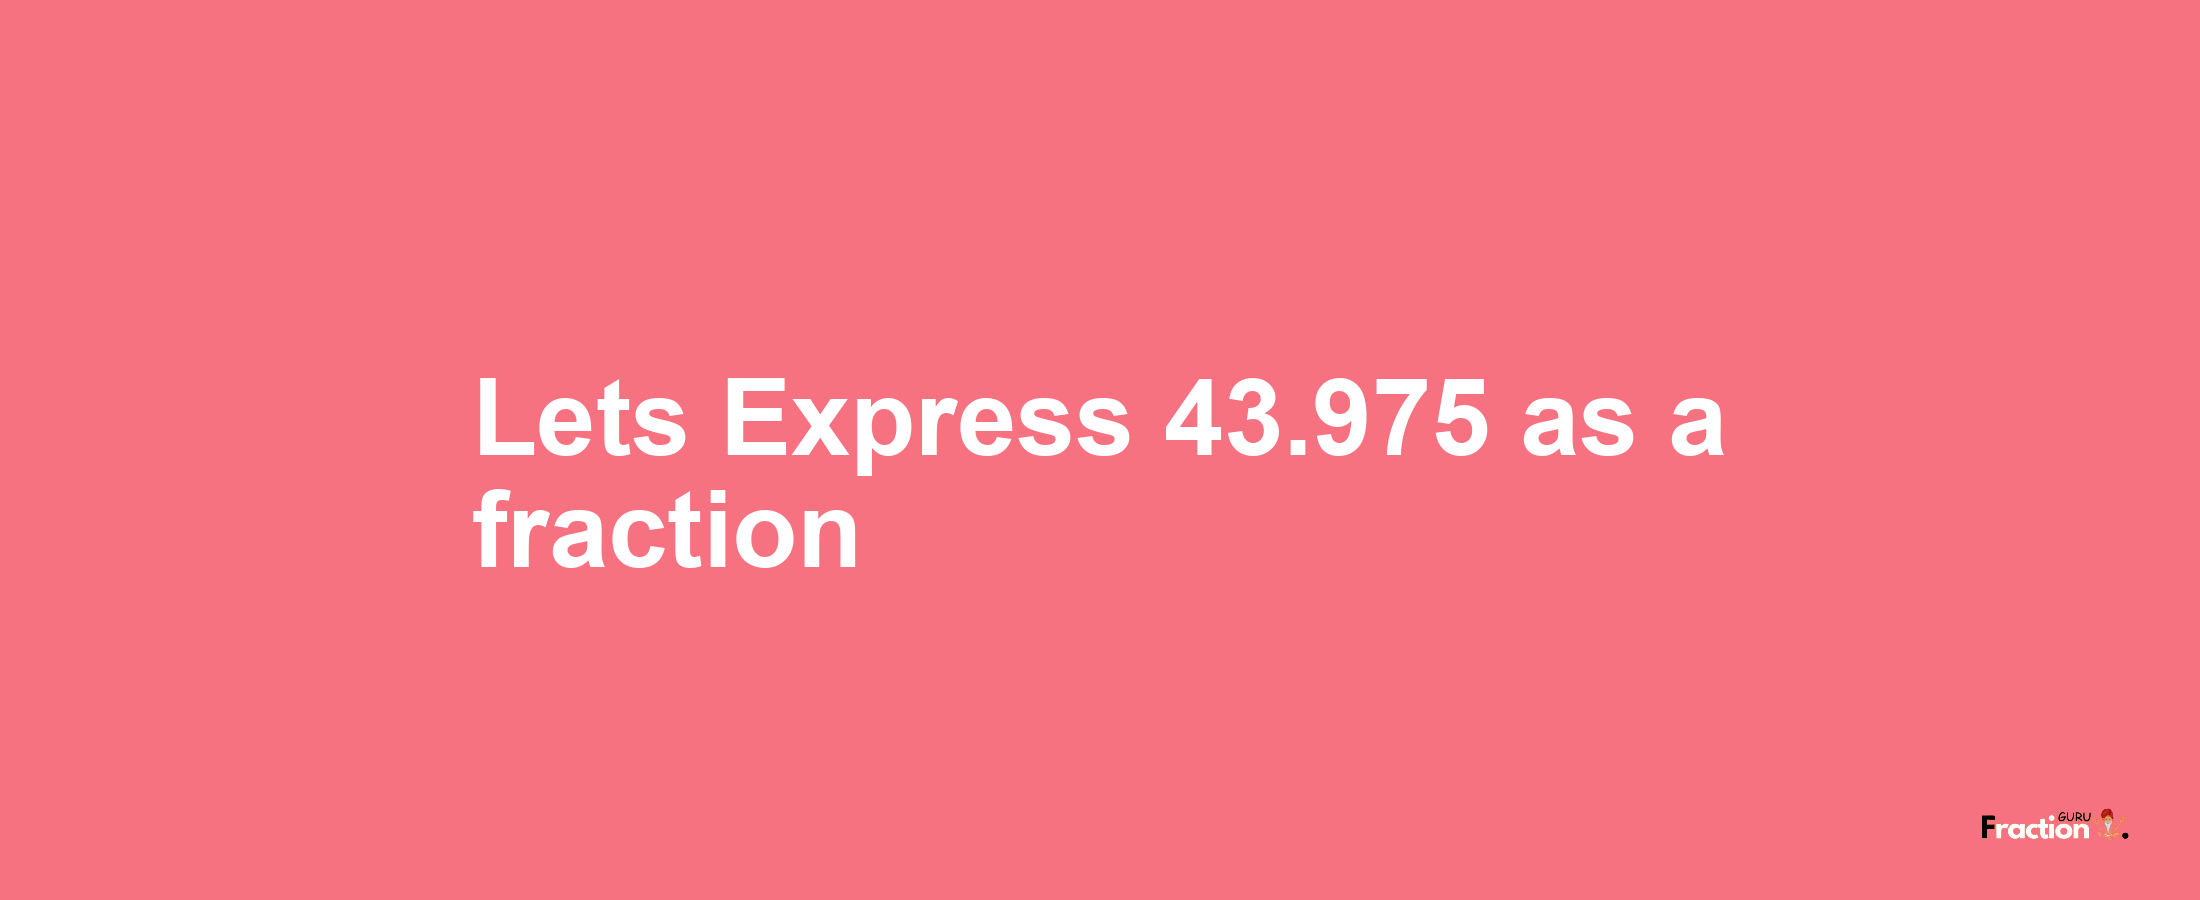 Lets Express 43.975 as afraction